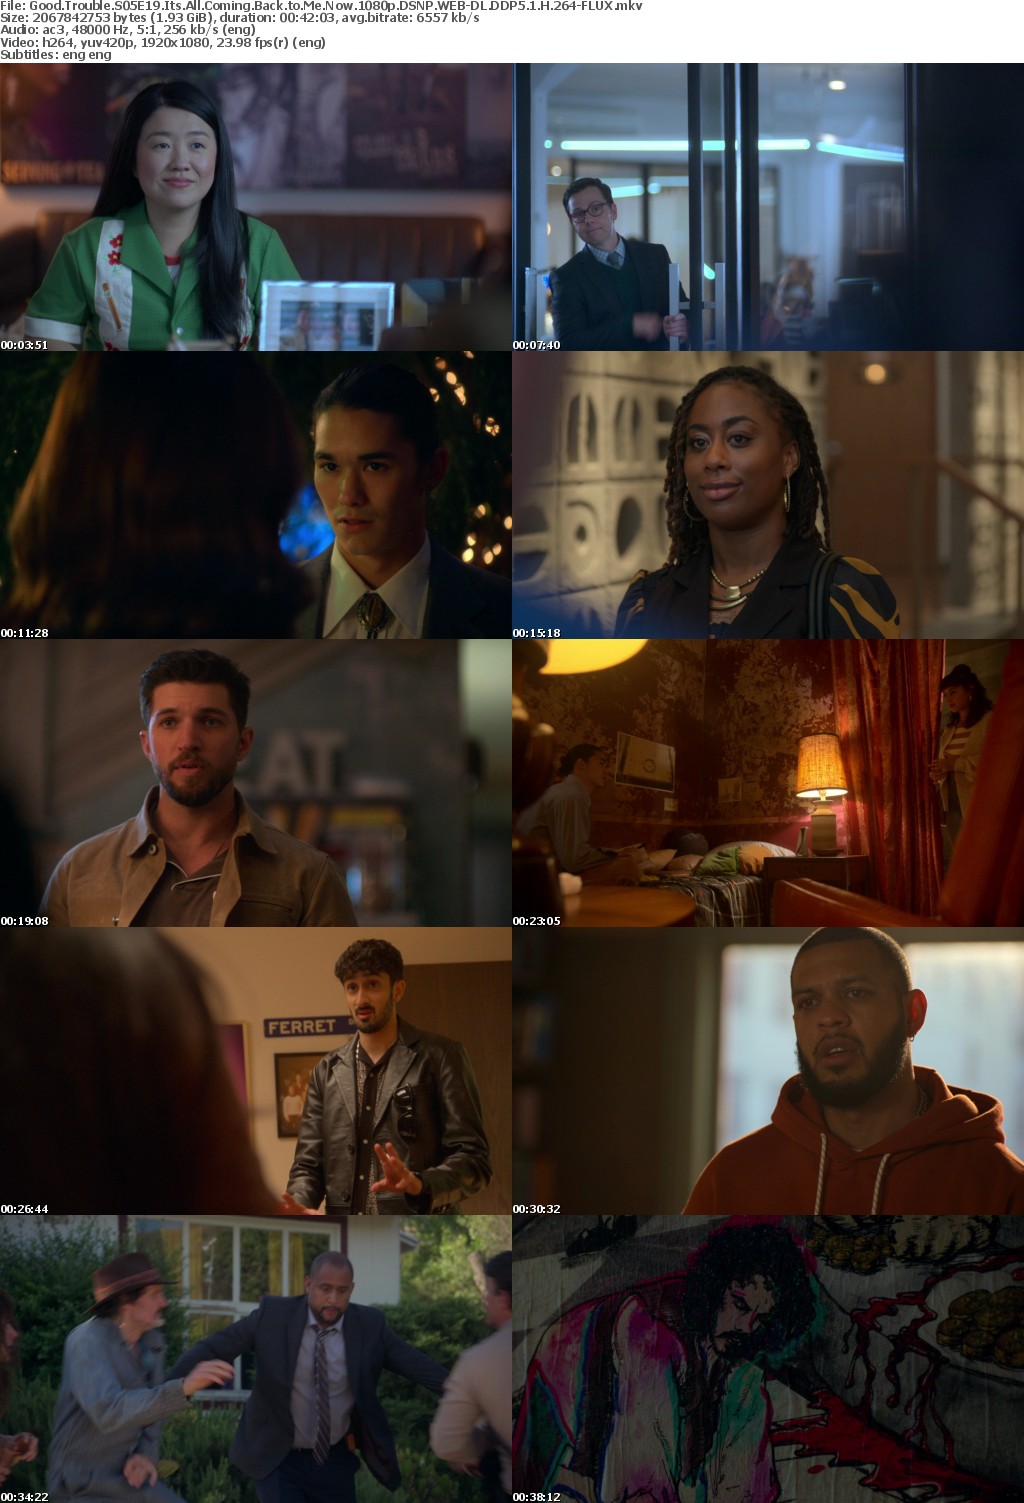 Good Trouble S05E19 Its All Coming Back to Me Now 1080p DSNP WEB-DL DDP5 1 H 264-FLUX